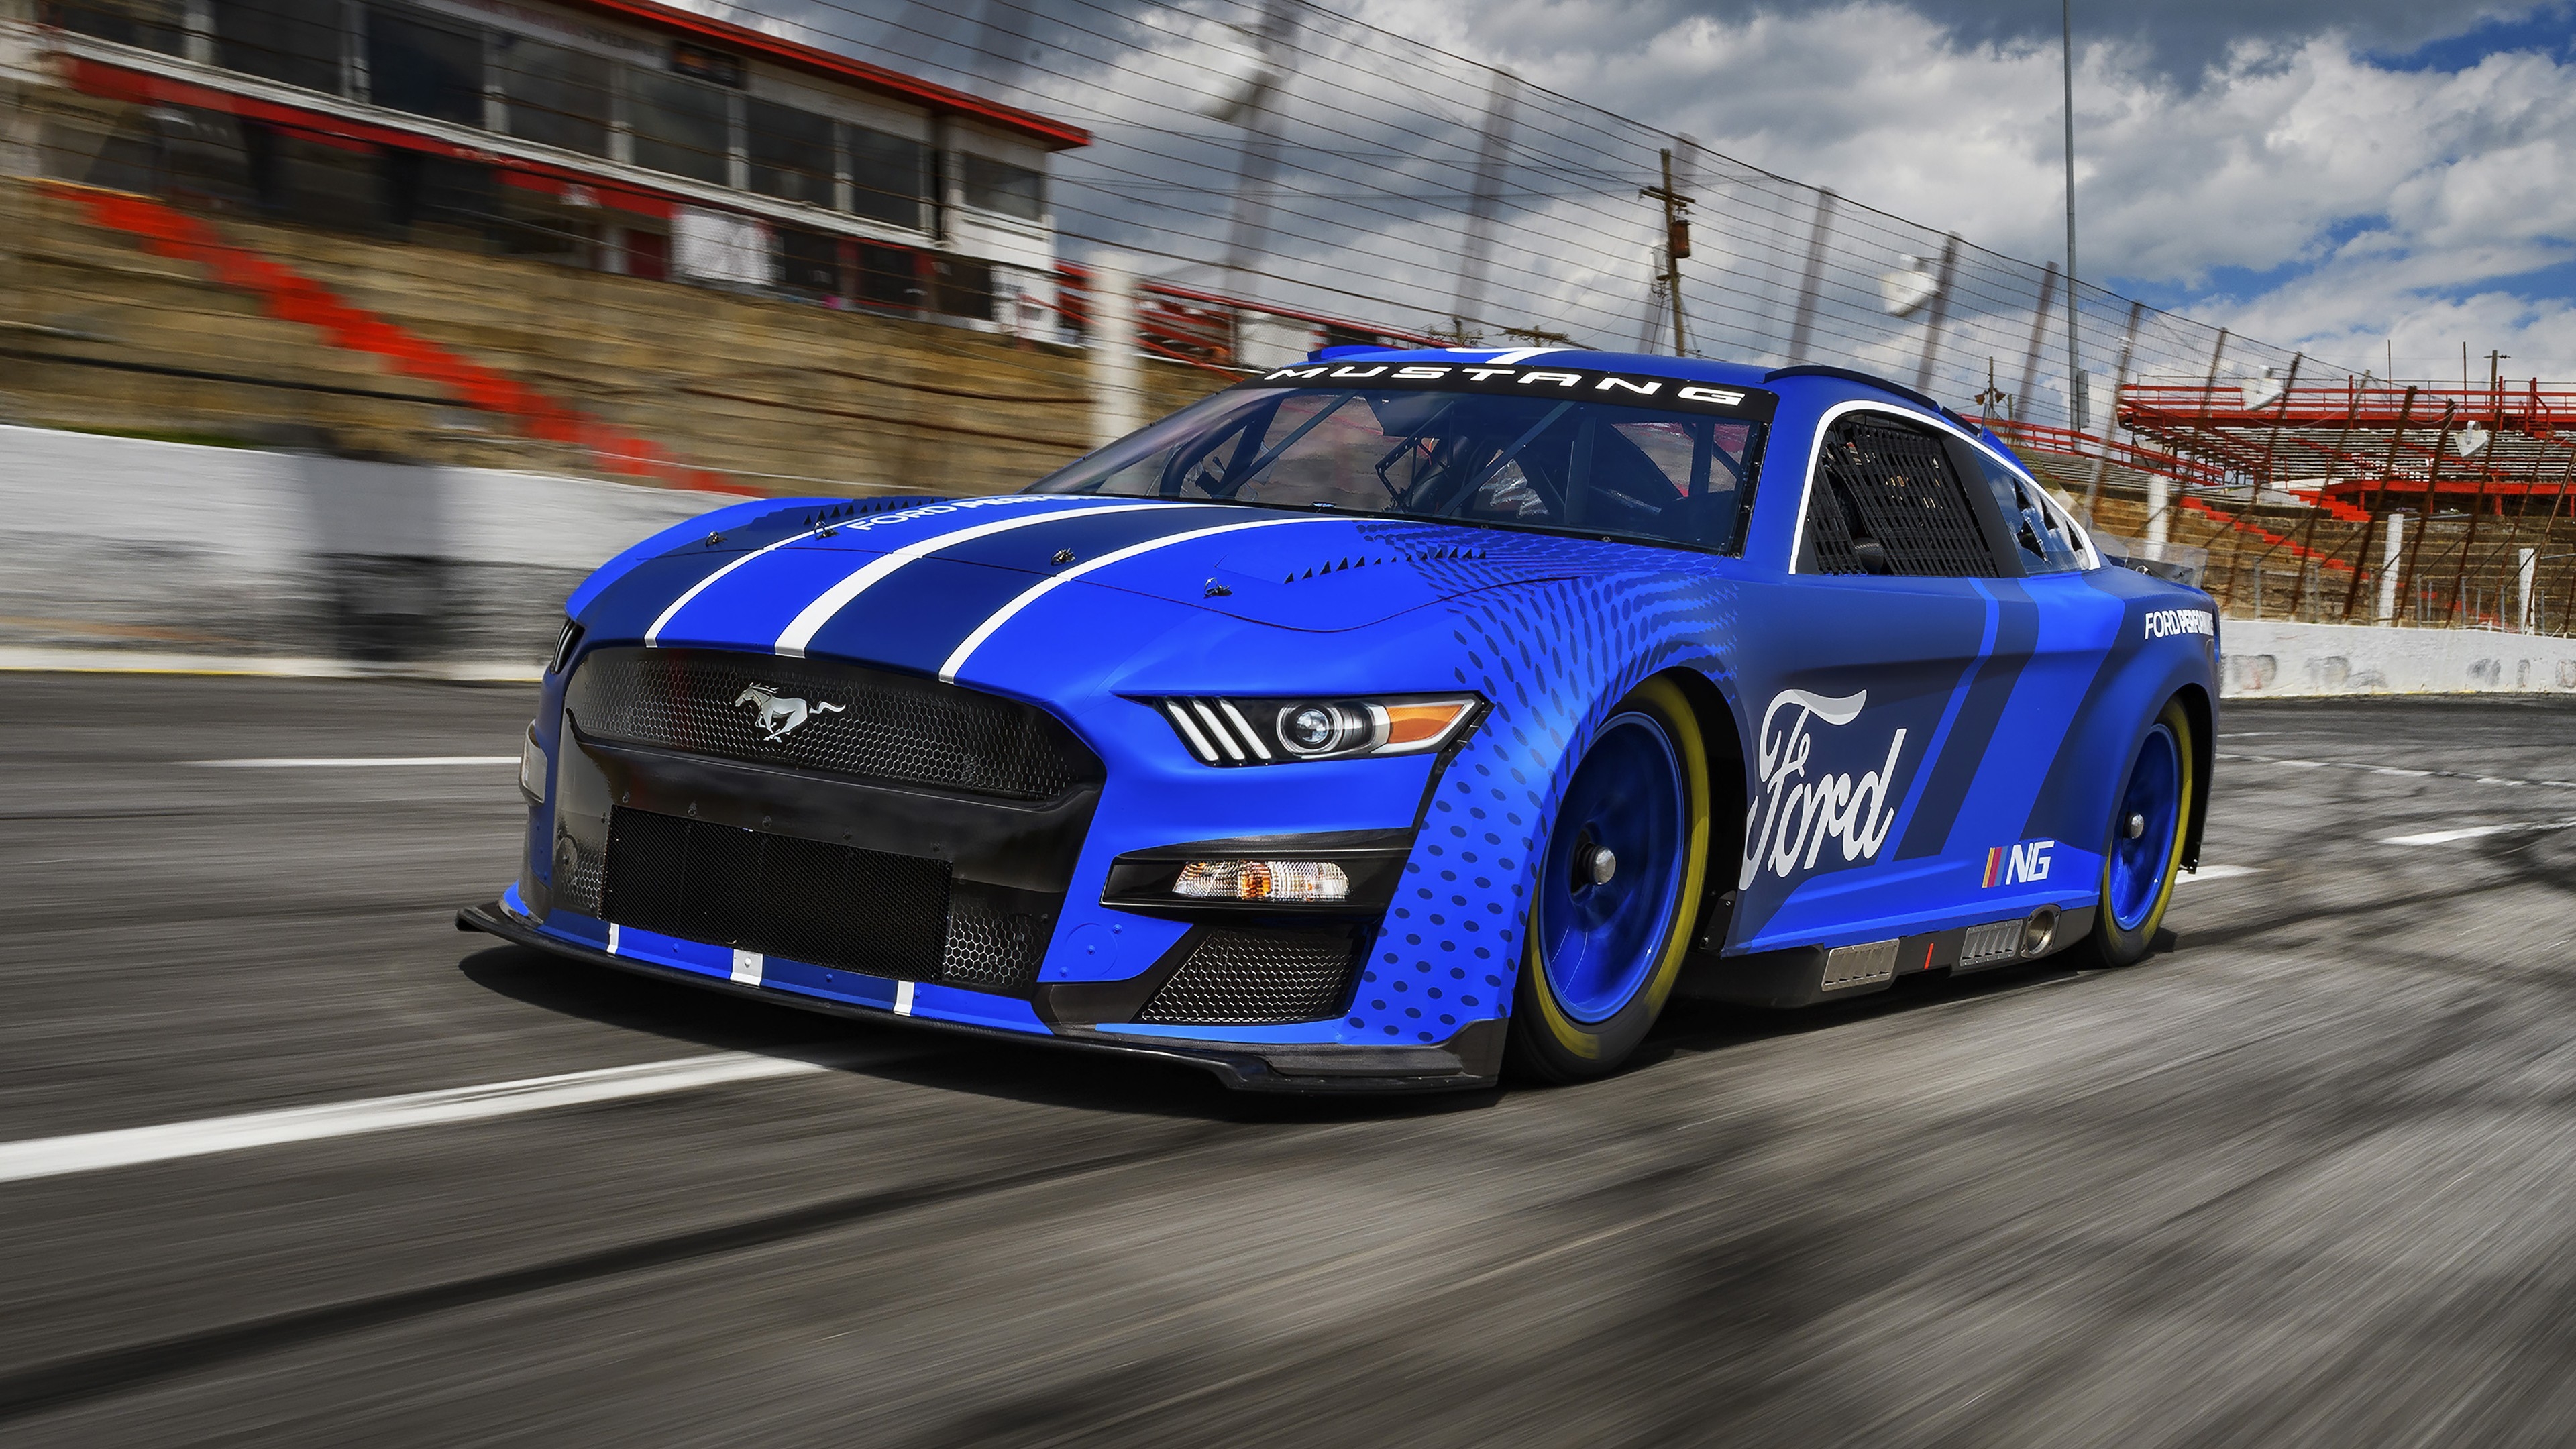 Wallpapers wallpaper ford mustang race track blue muscle cars on the desktop